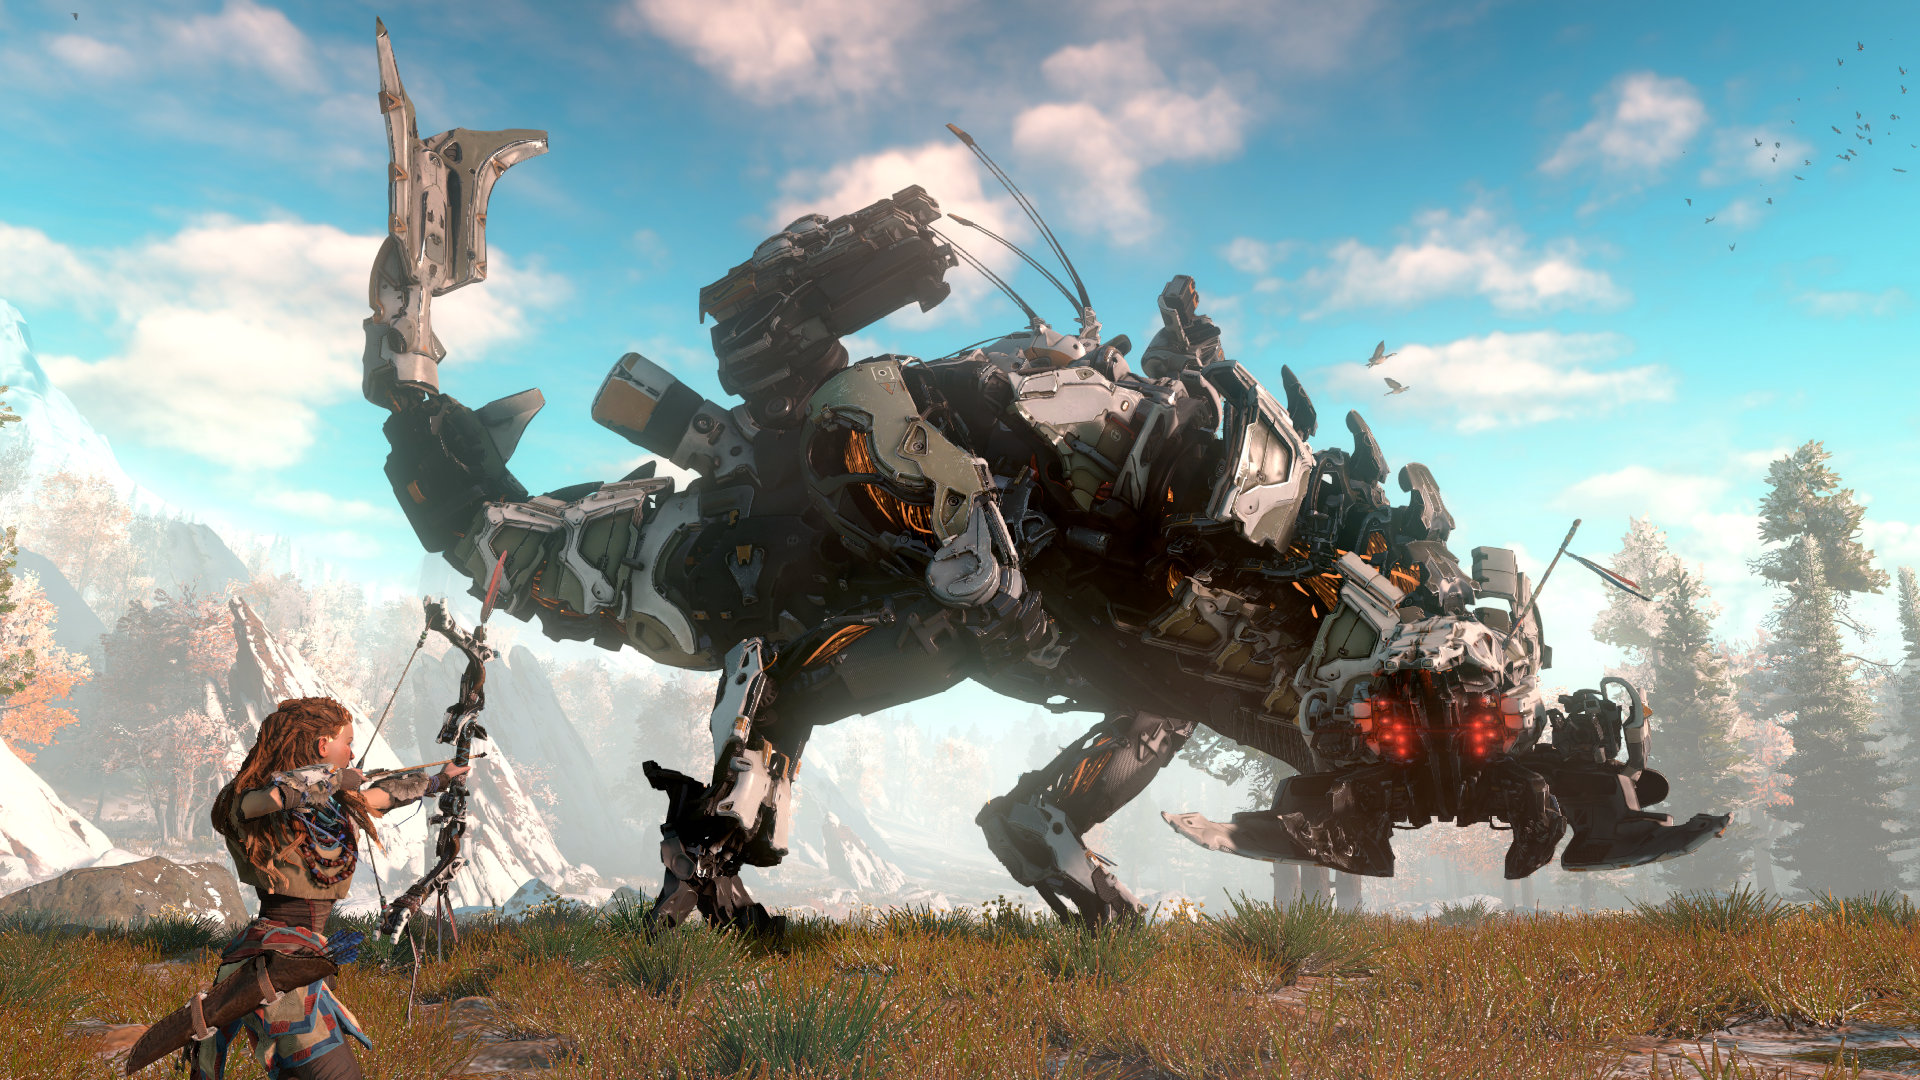 “Horizon Zero Dawn” Delayed Into Early 2017 - Wanted Quality to Live Up What Was Shown